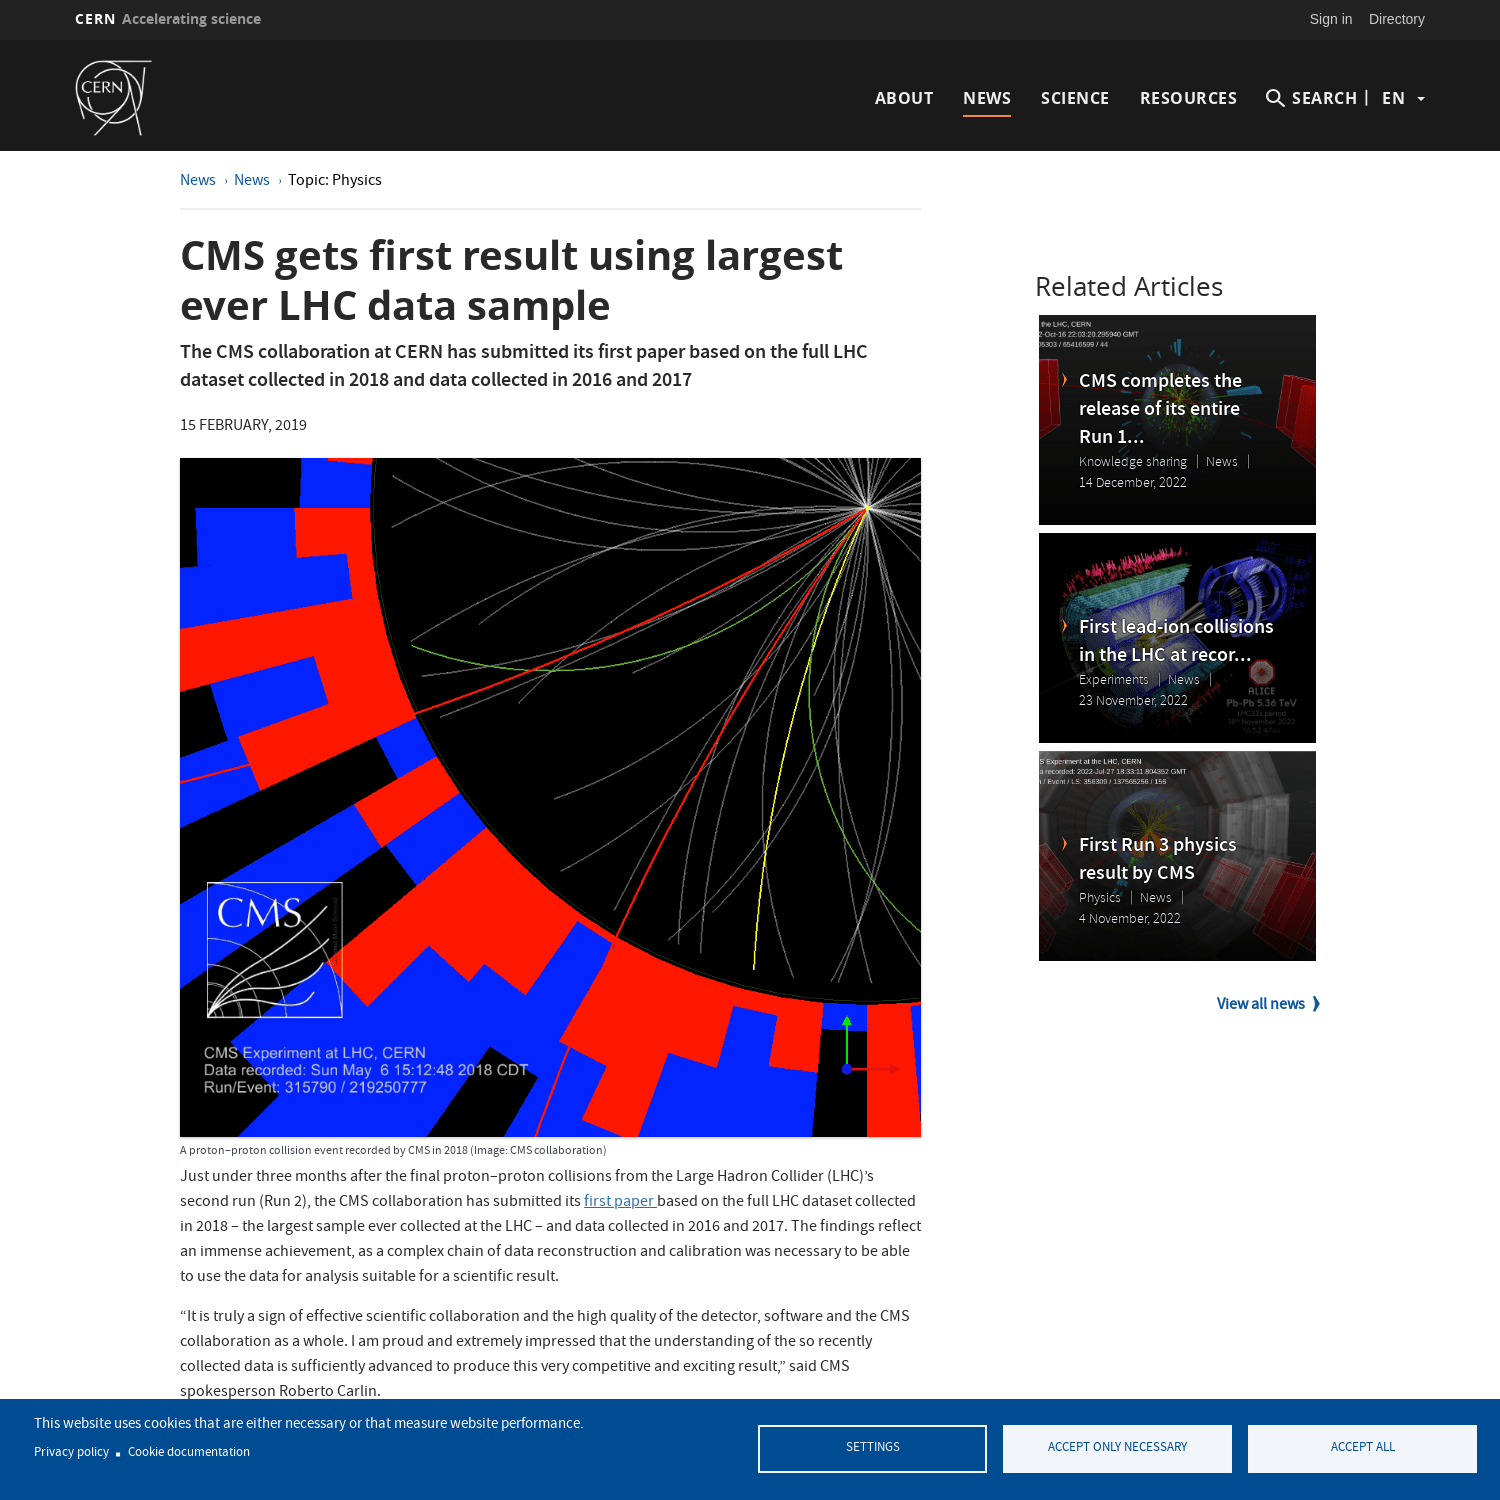 CMS gets first result using largest ever LHC data sample